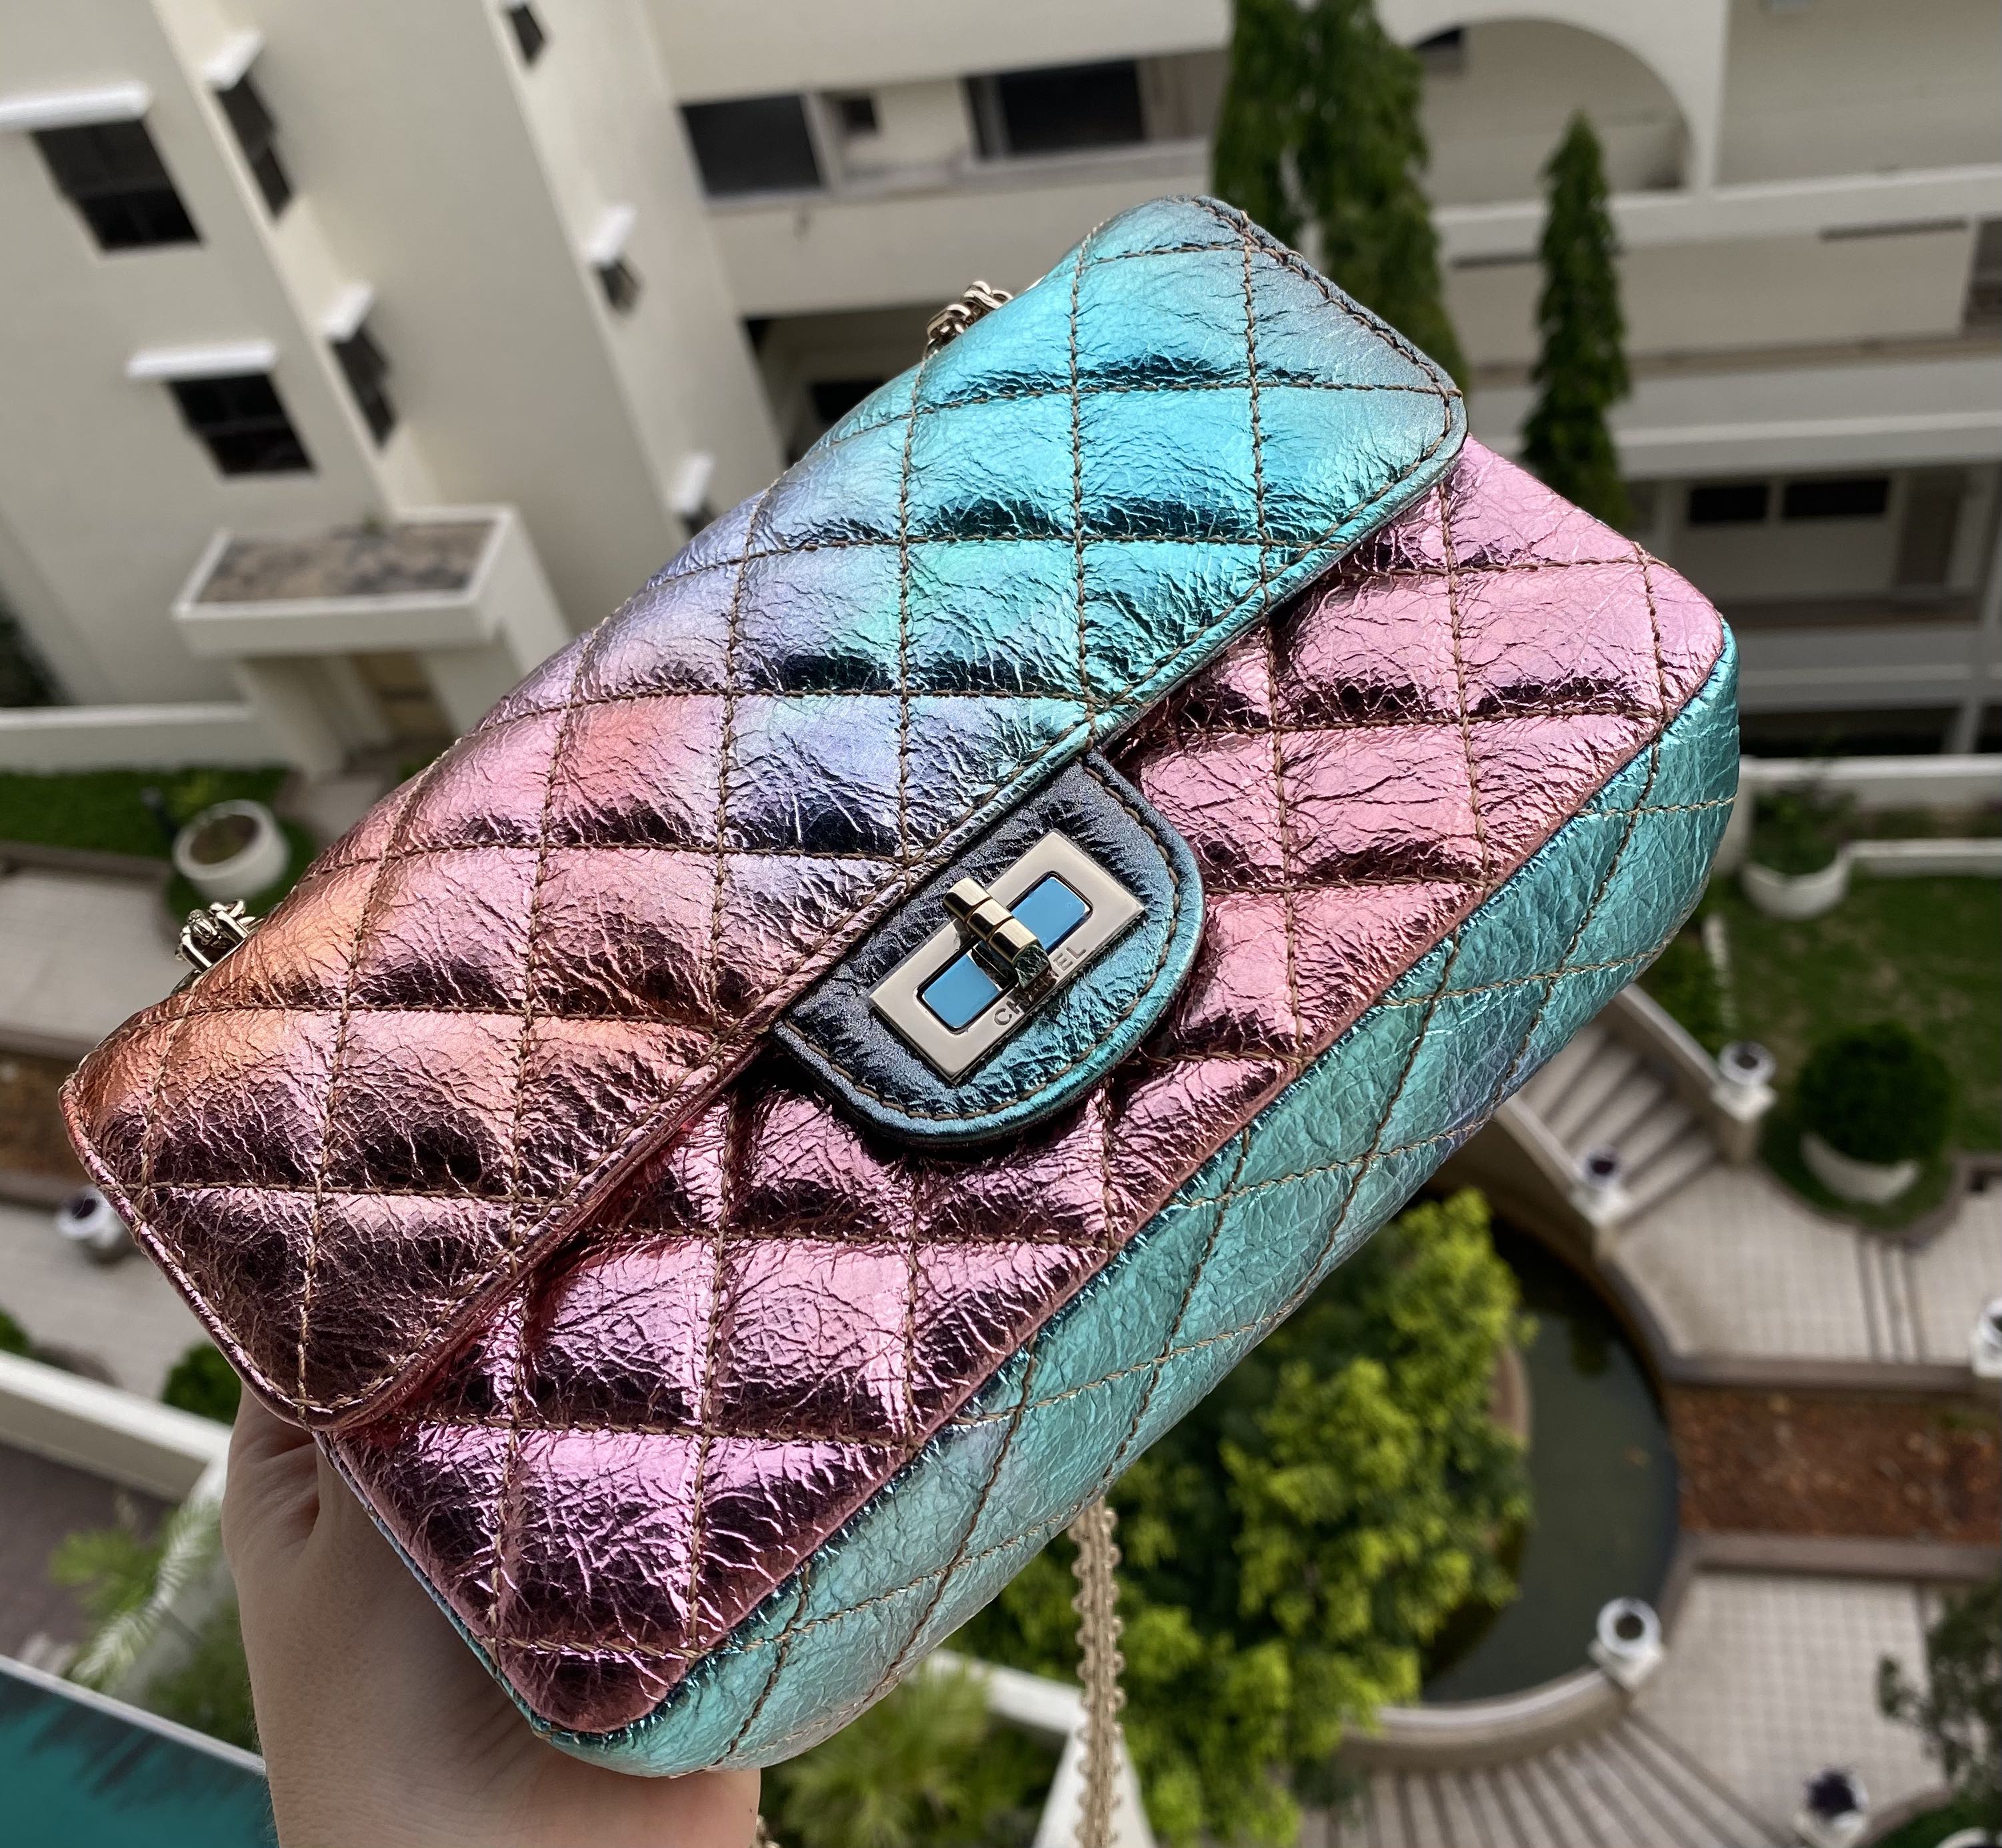 LET'S TALK ABOUT THE CHANEL MINI RAINBOW REISSUE